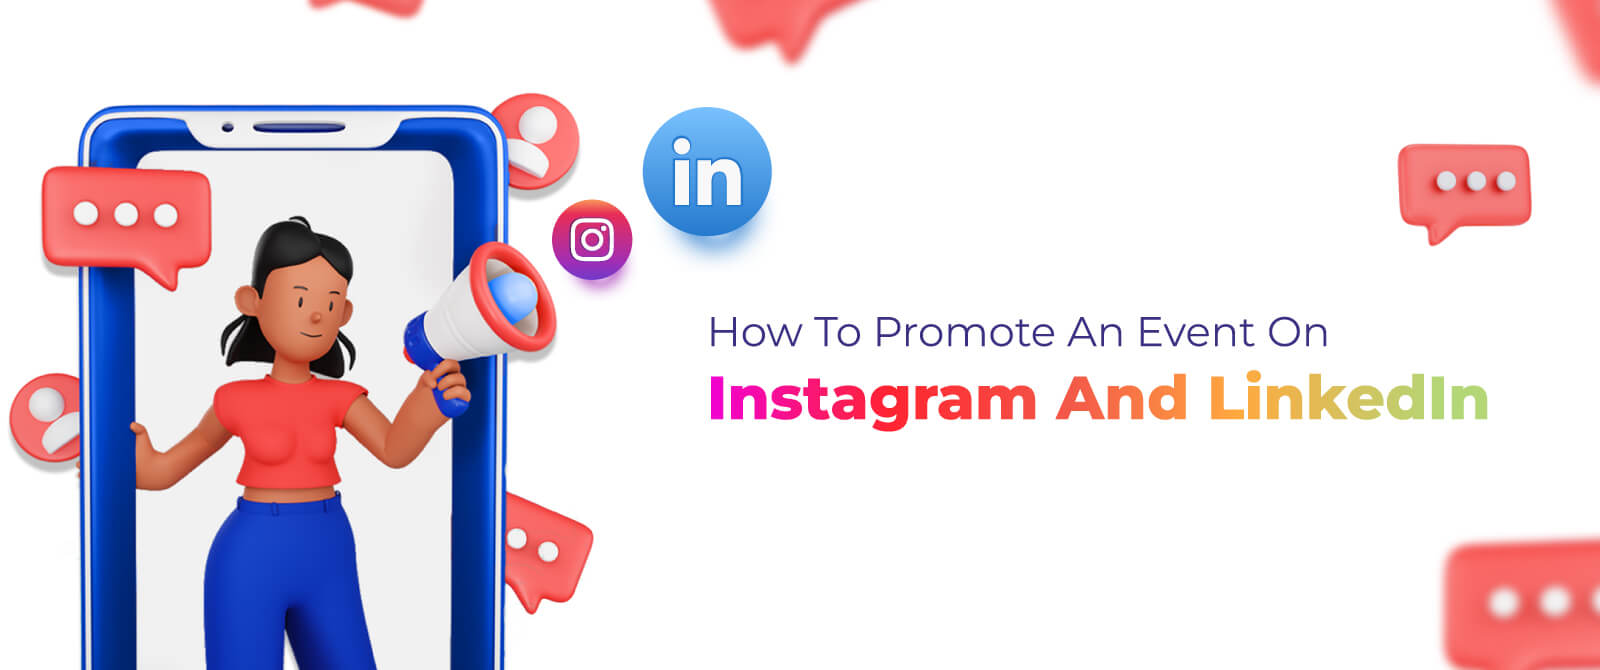 How to Promote an Event on Instagram and LinkedIn